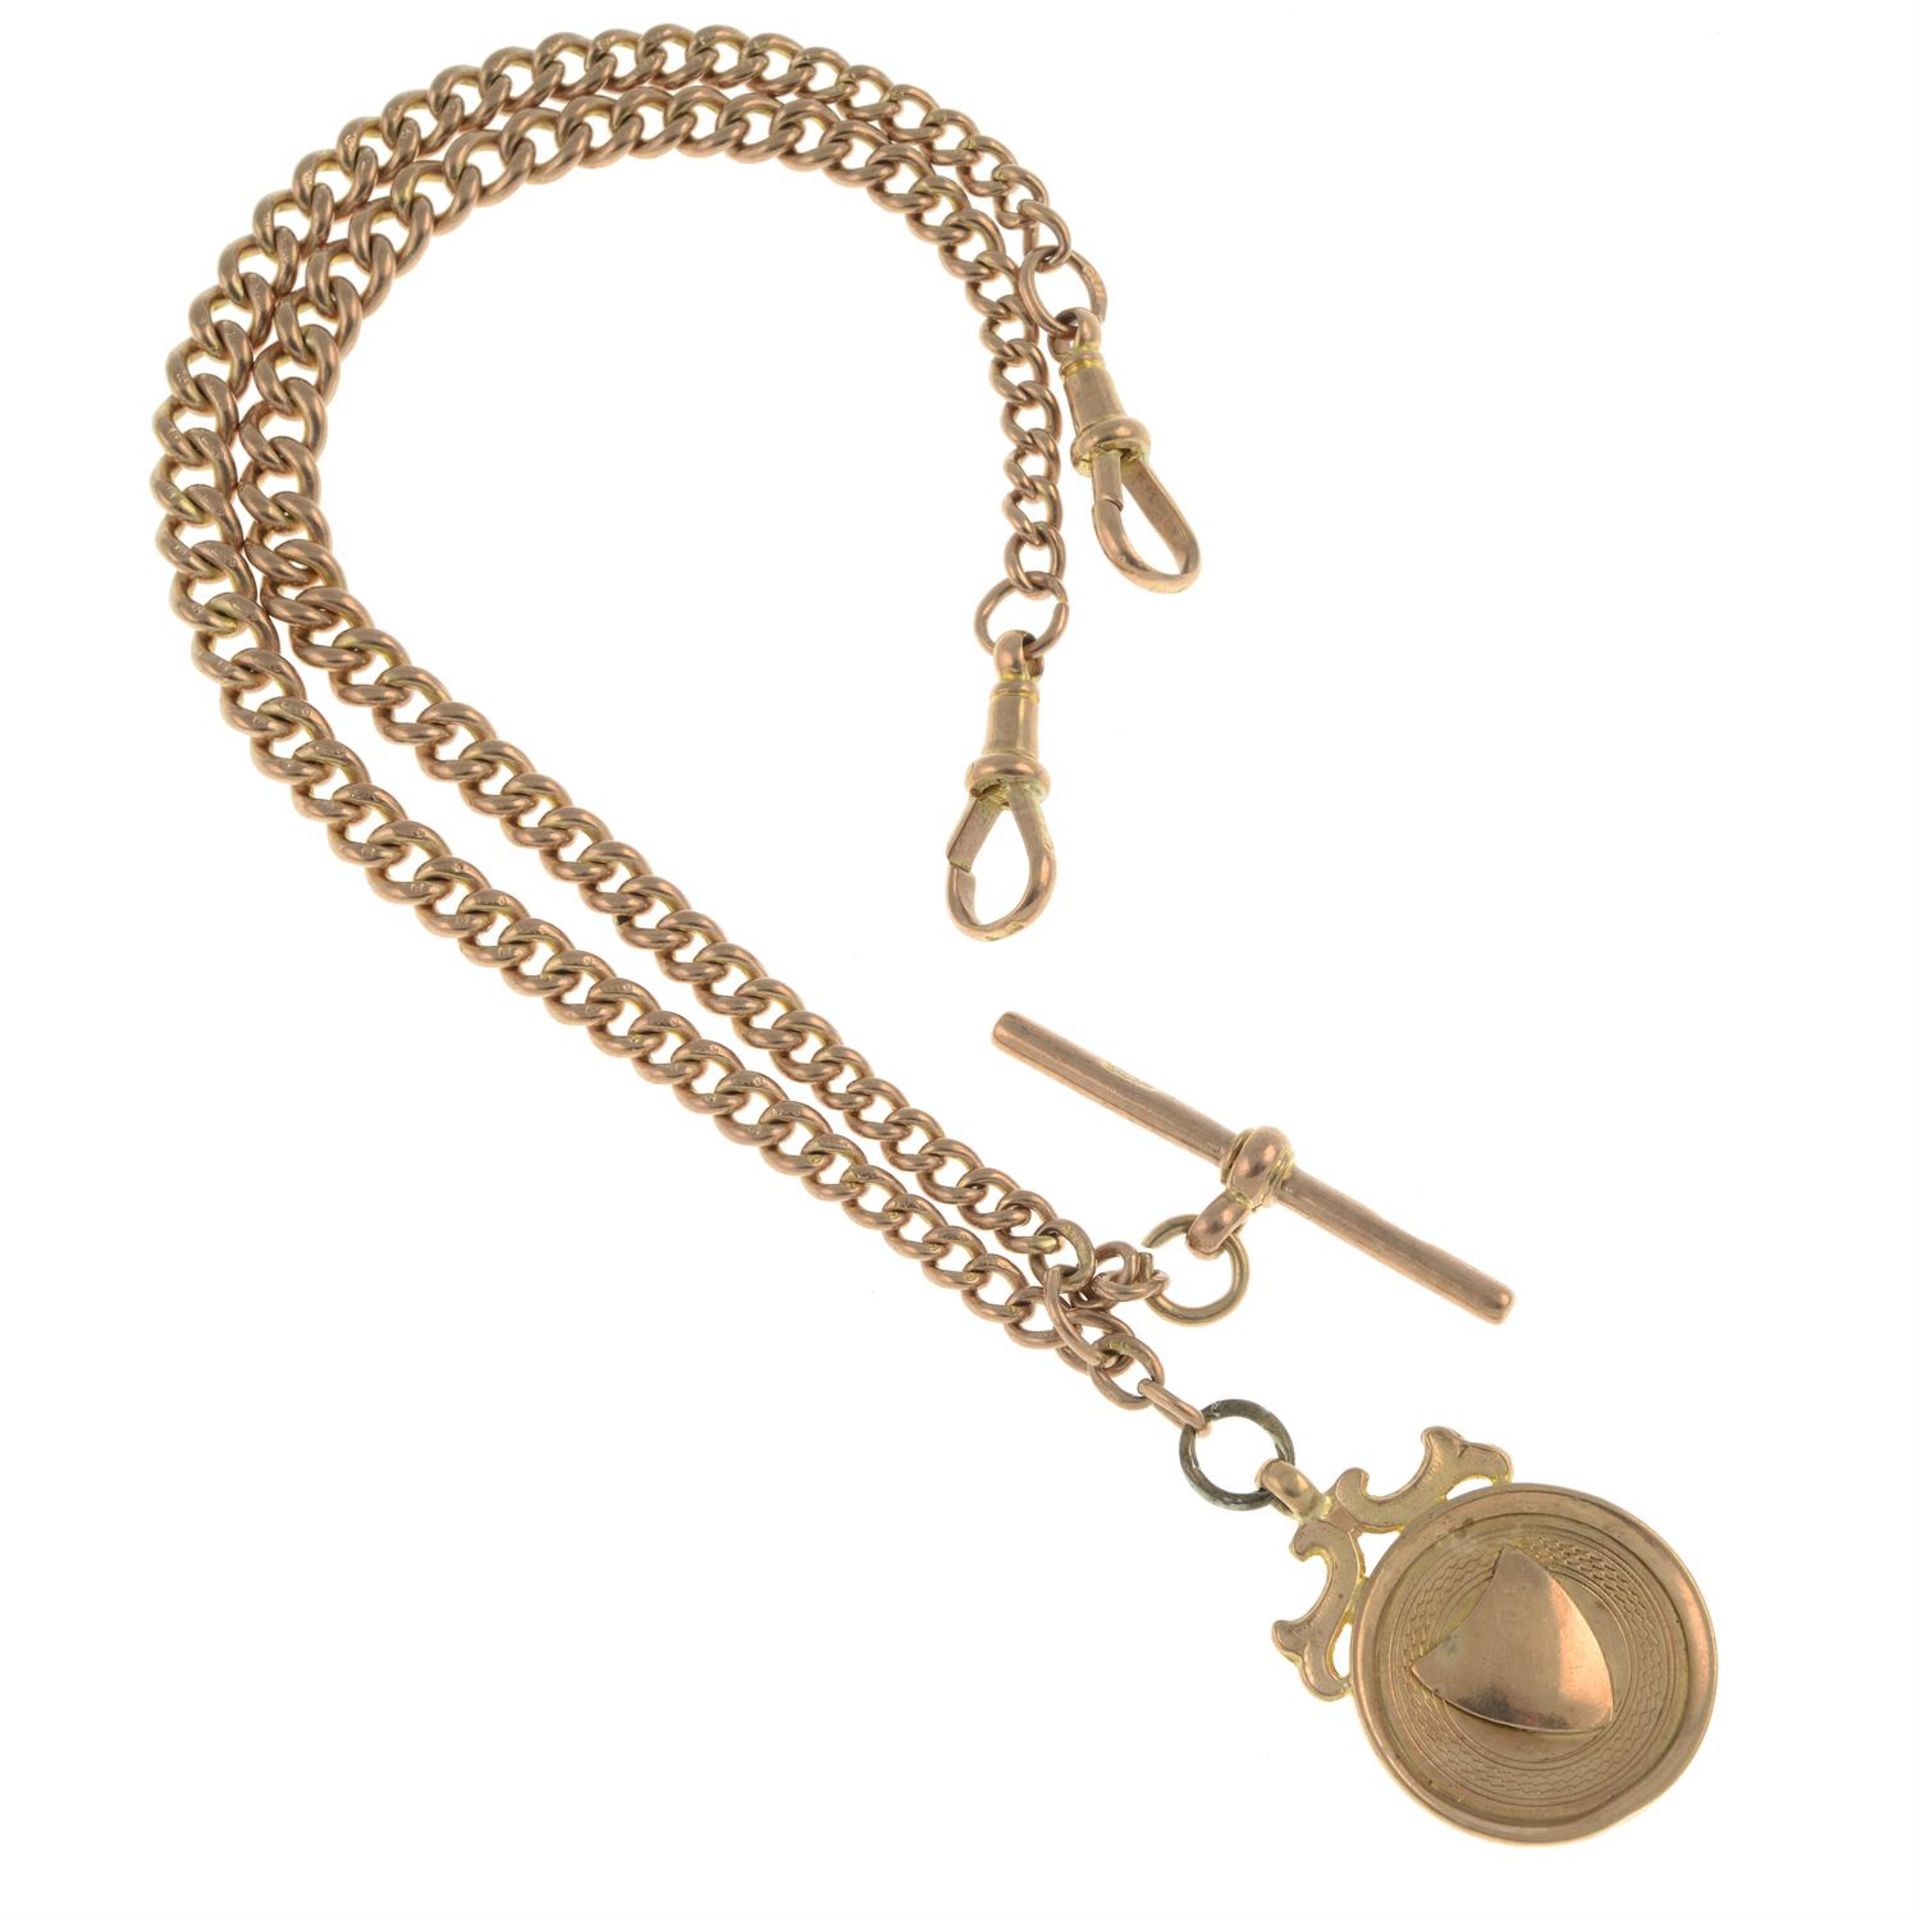 9ct gold Albert chain, with 9ct gold fob